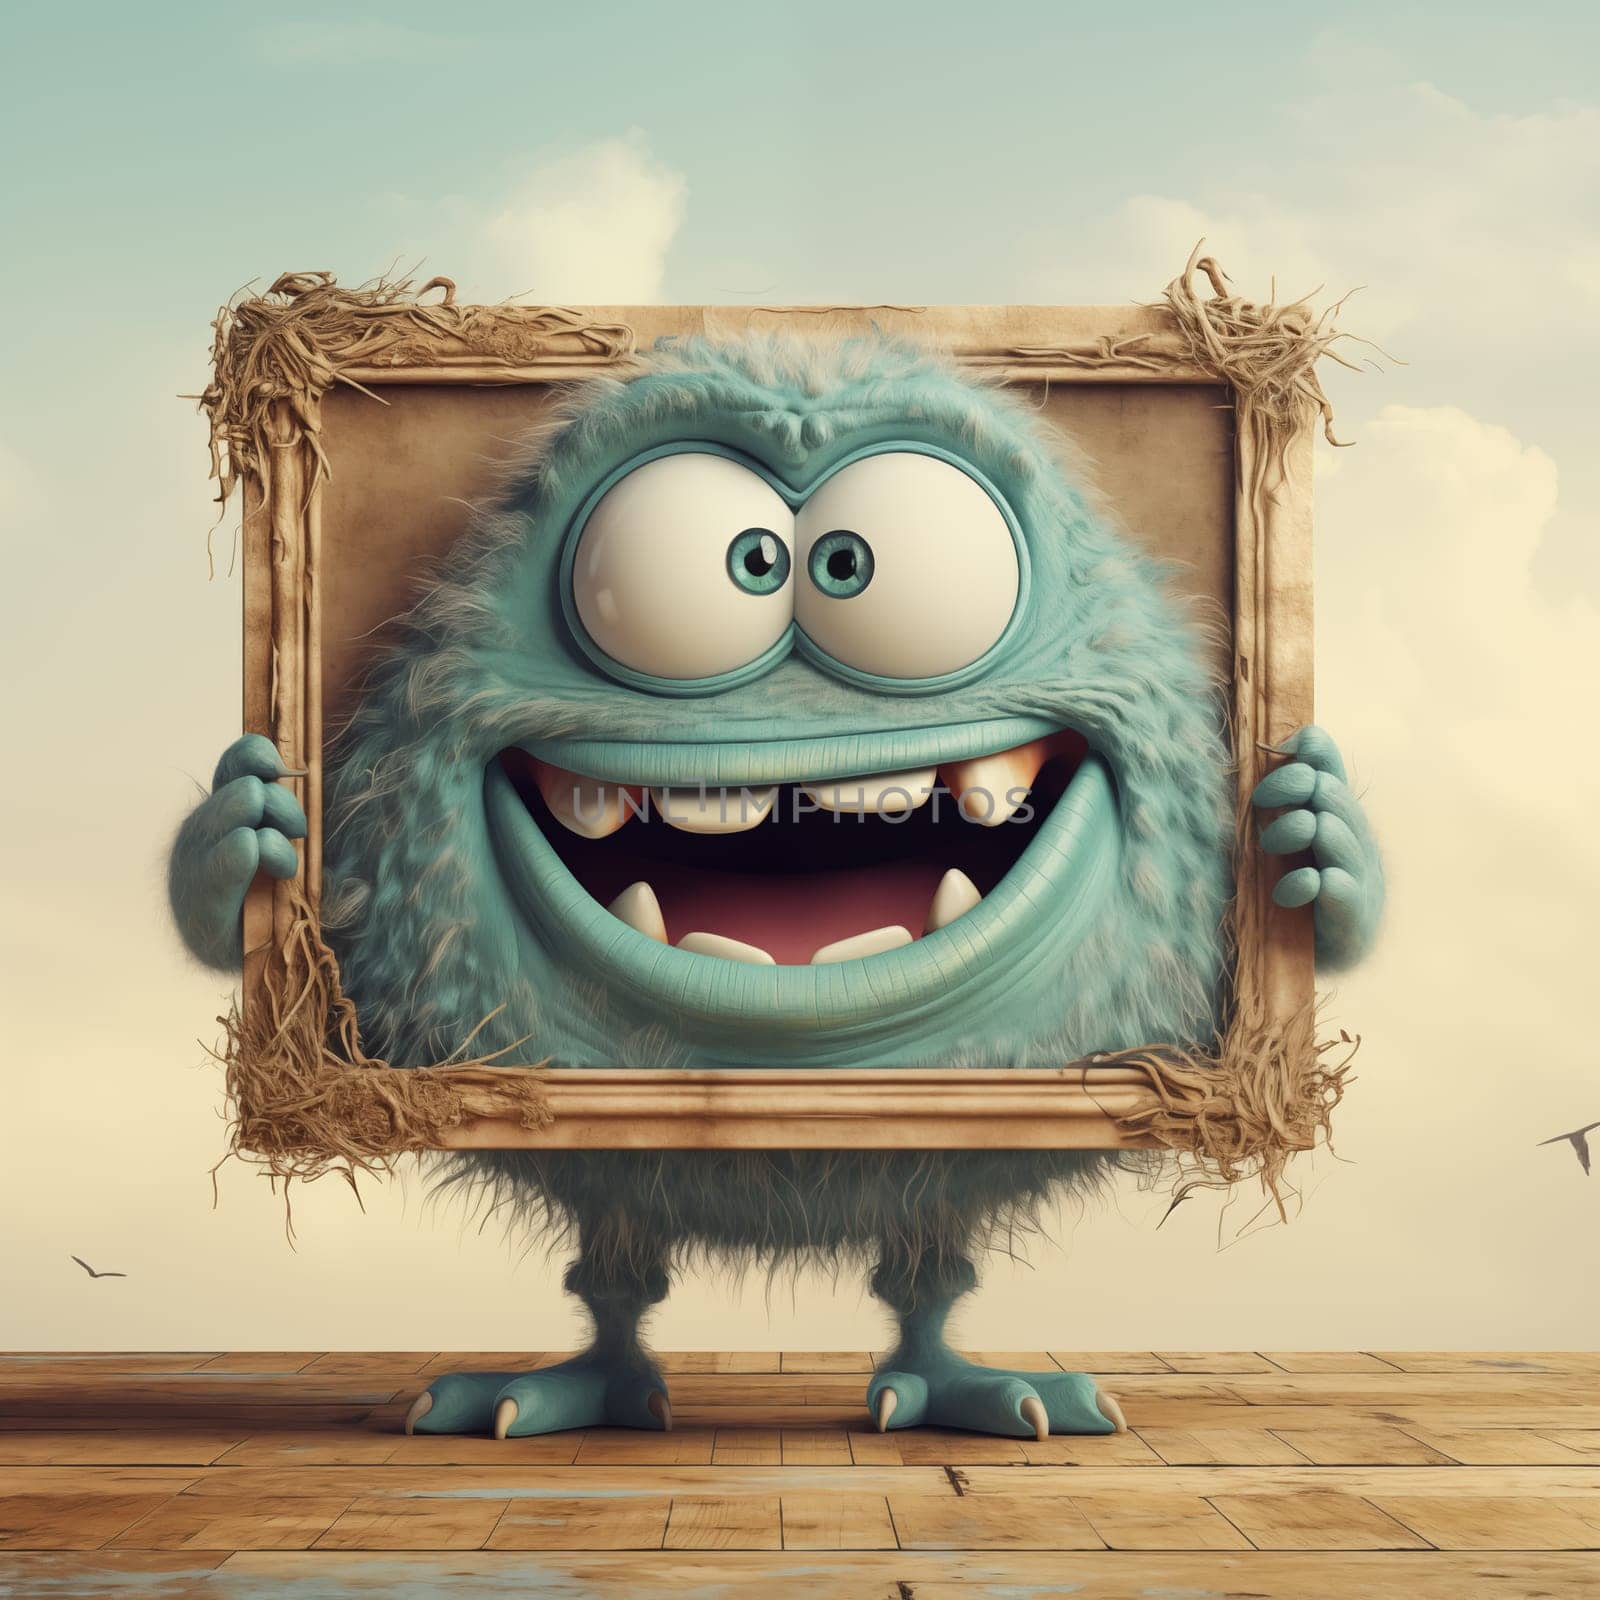 An exuberant blue monster with large eyes and a toothy smile, holding a rustic straw-framed sign on a wooden deck